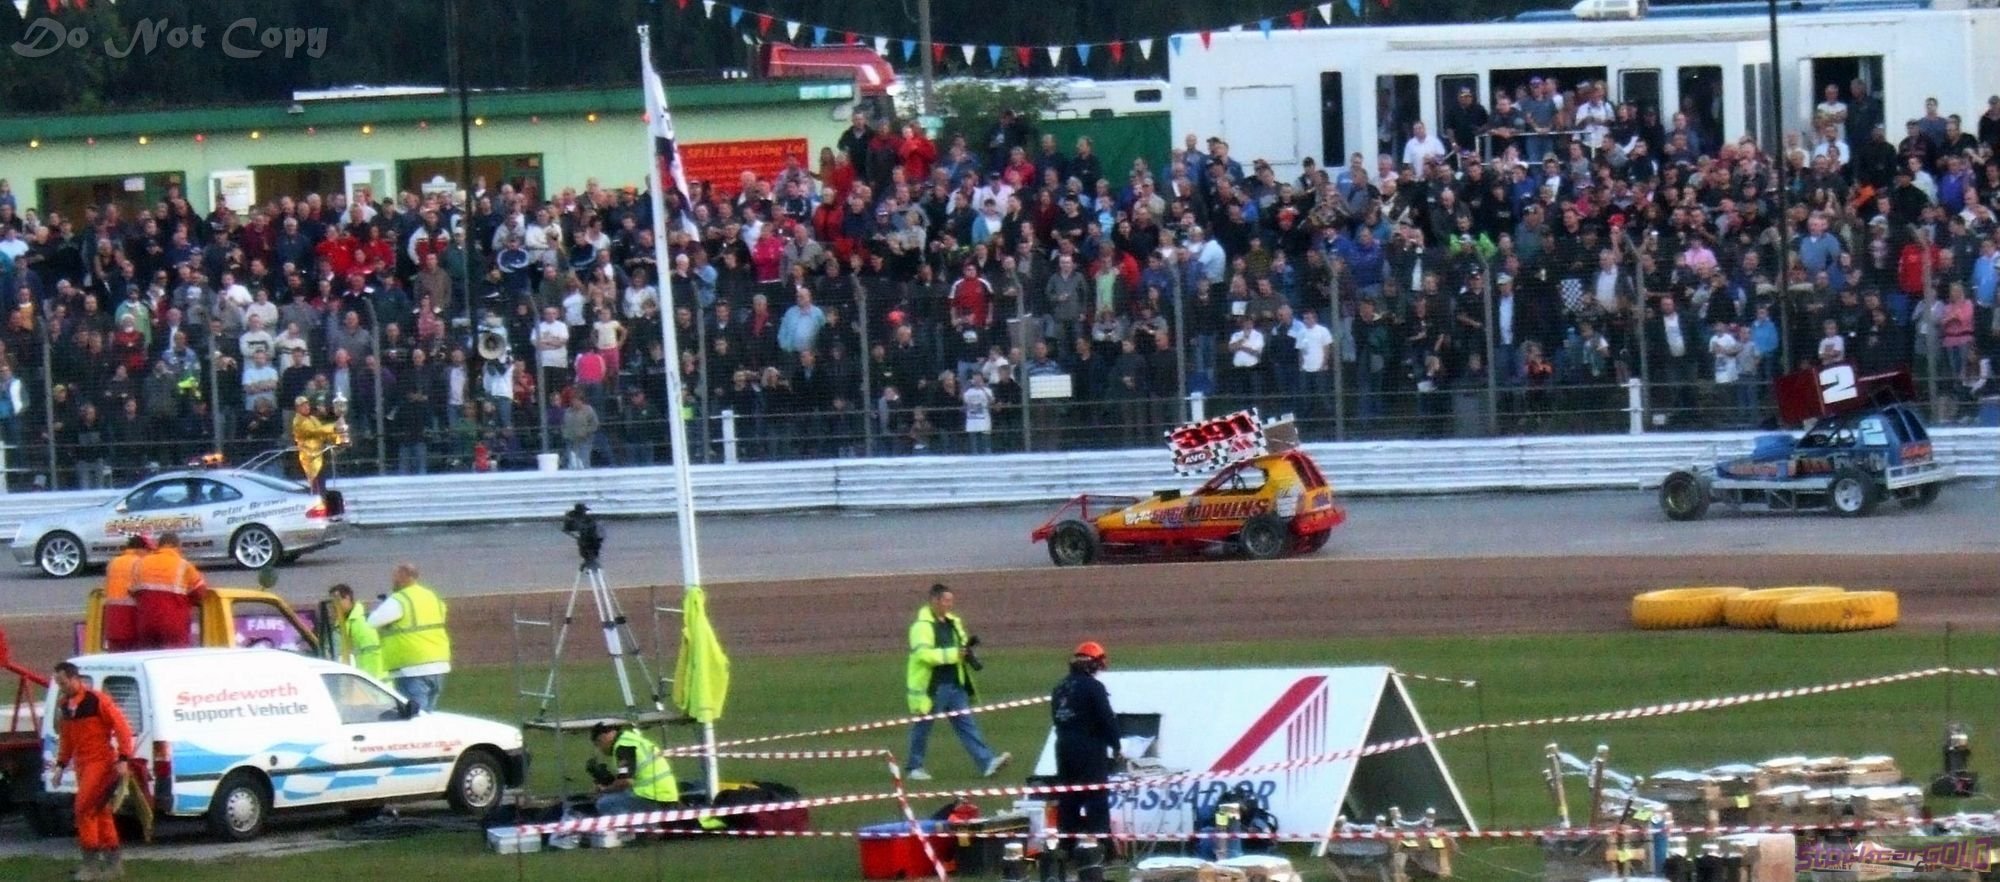 Andy Smith 391